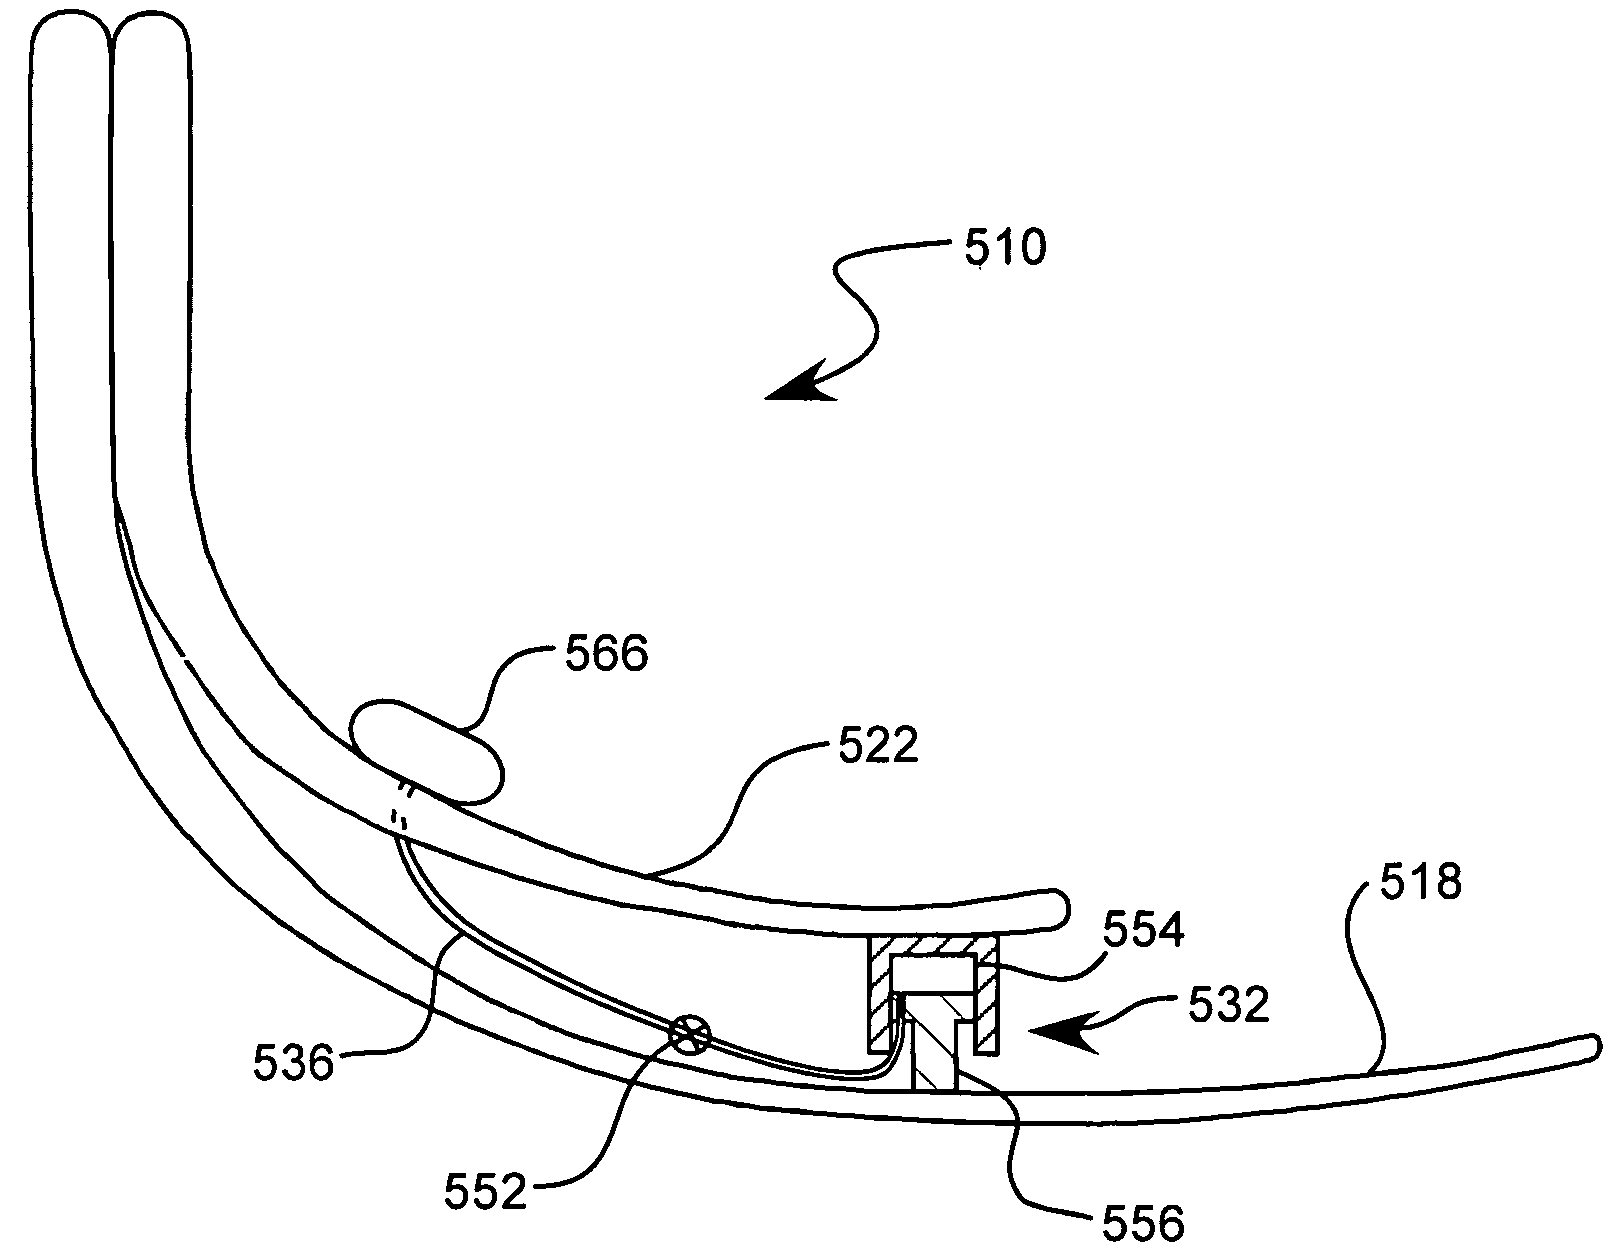 Prosthetic foot with energy transfer including variable orifice